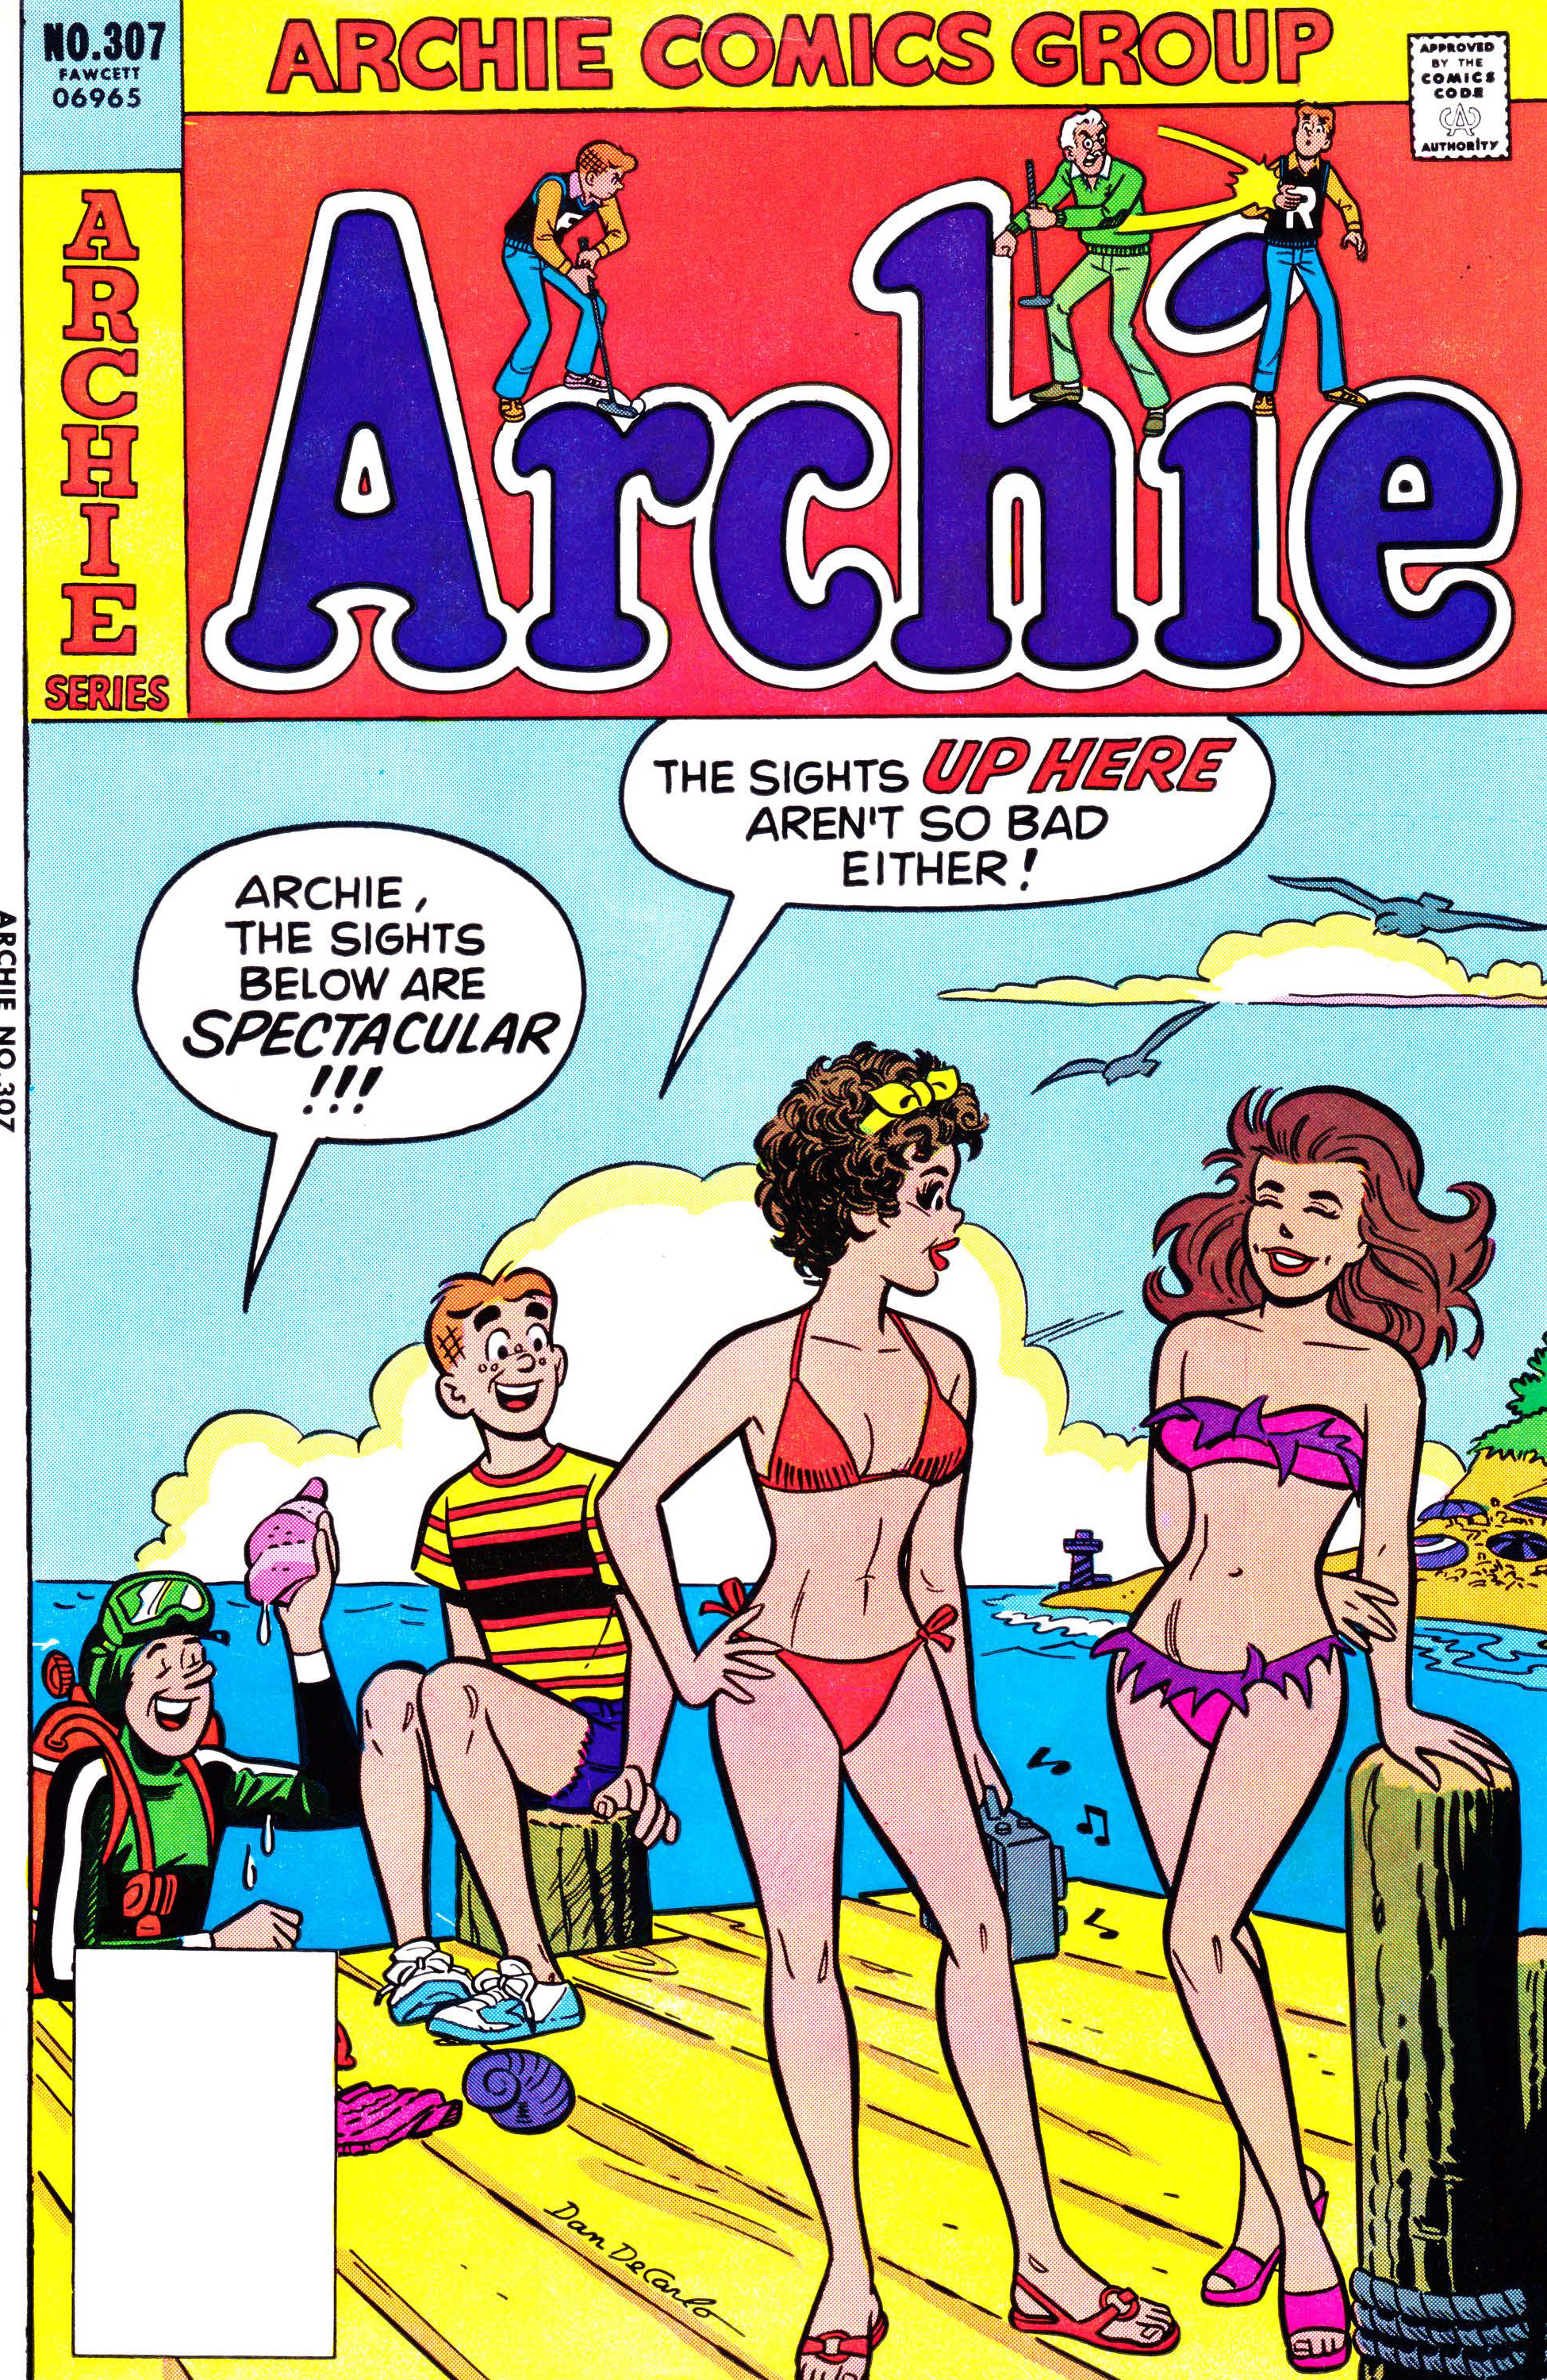 Read online Archie (1960) comic -  Issue #307 - 1